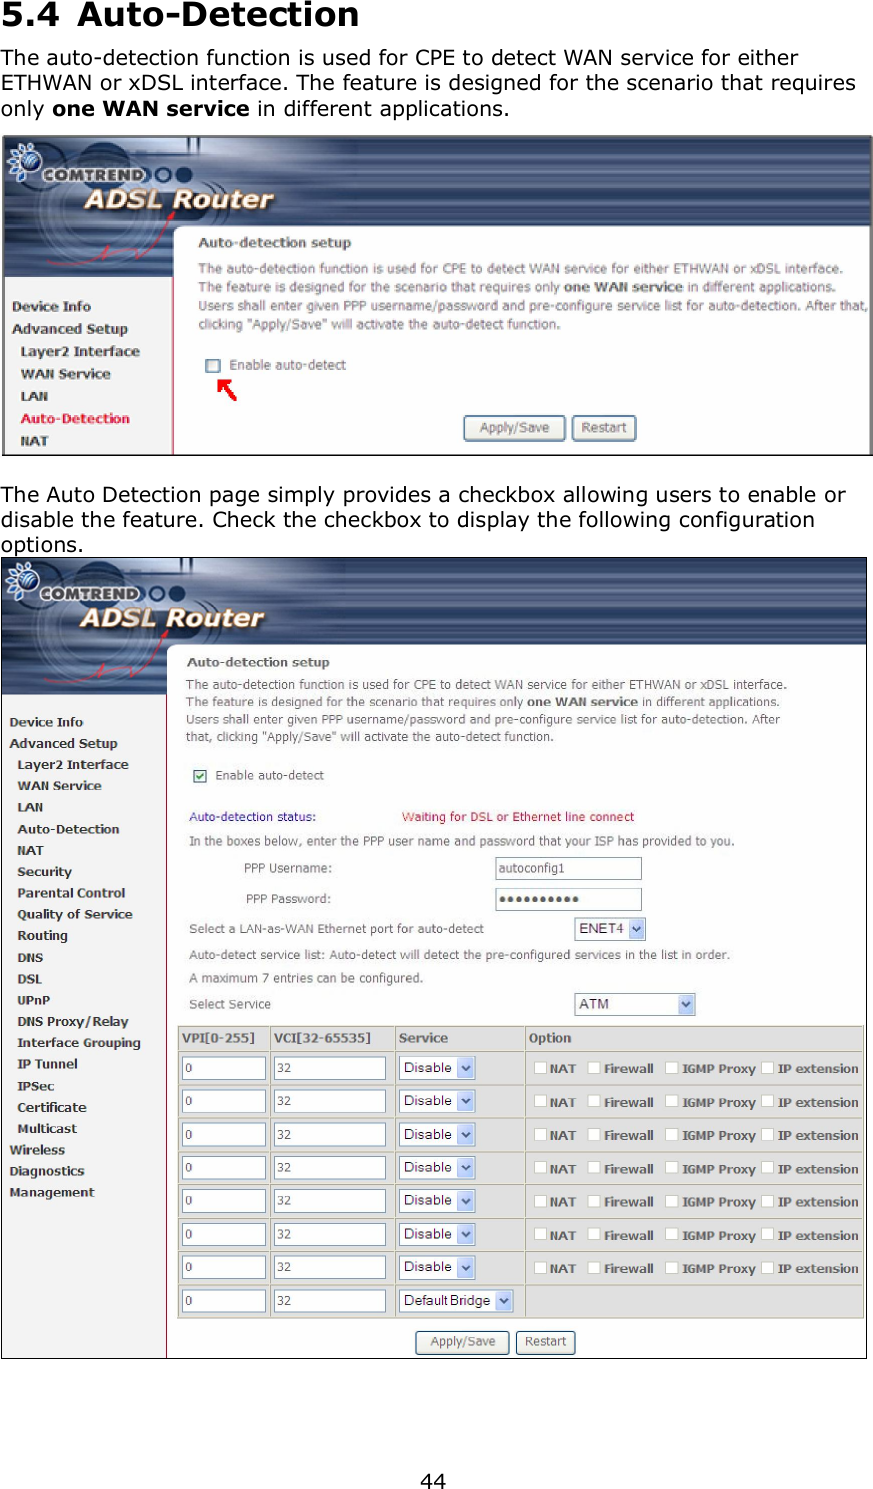  44 5.4  Auto-Detection The auto-detection function is used for CPE to detect WAN service for either ETHWAN or xDSL interface. The feature is designed for the scenario that requires only one WAN service in different applications.     The Auto Detection page simply provides a checkbox allowing users to enable or disable the feature. Check the checkbox to display the following configuration options.  